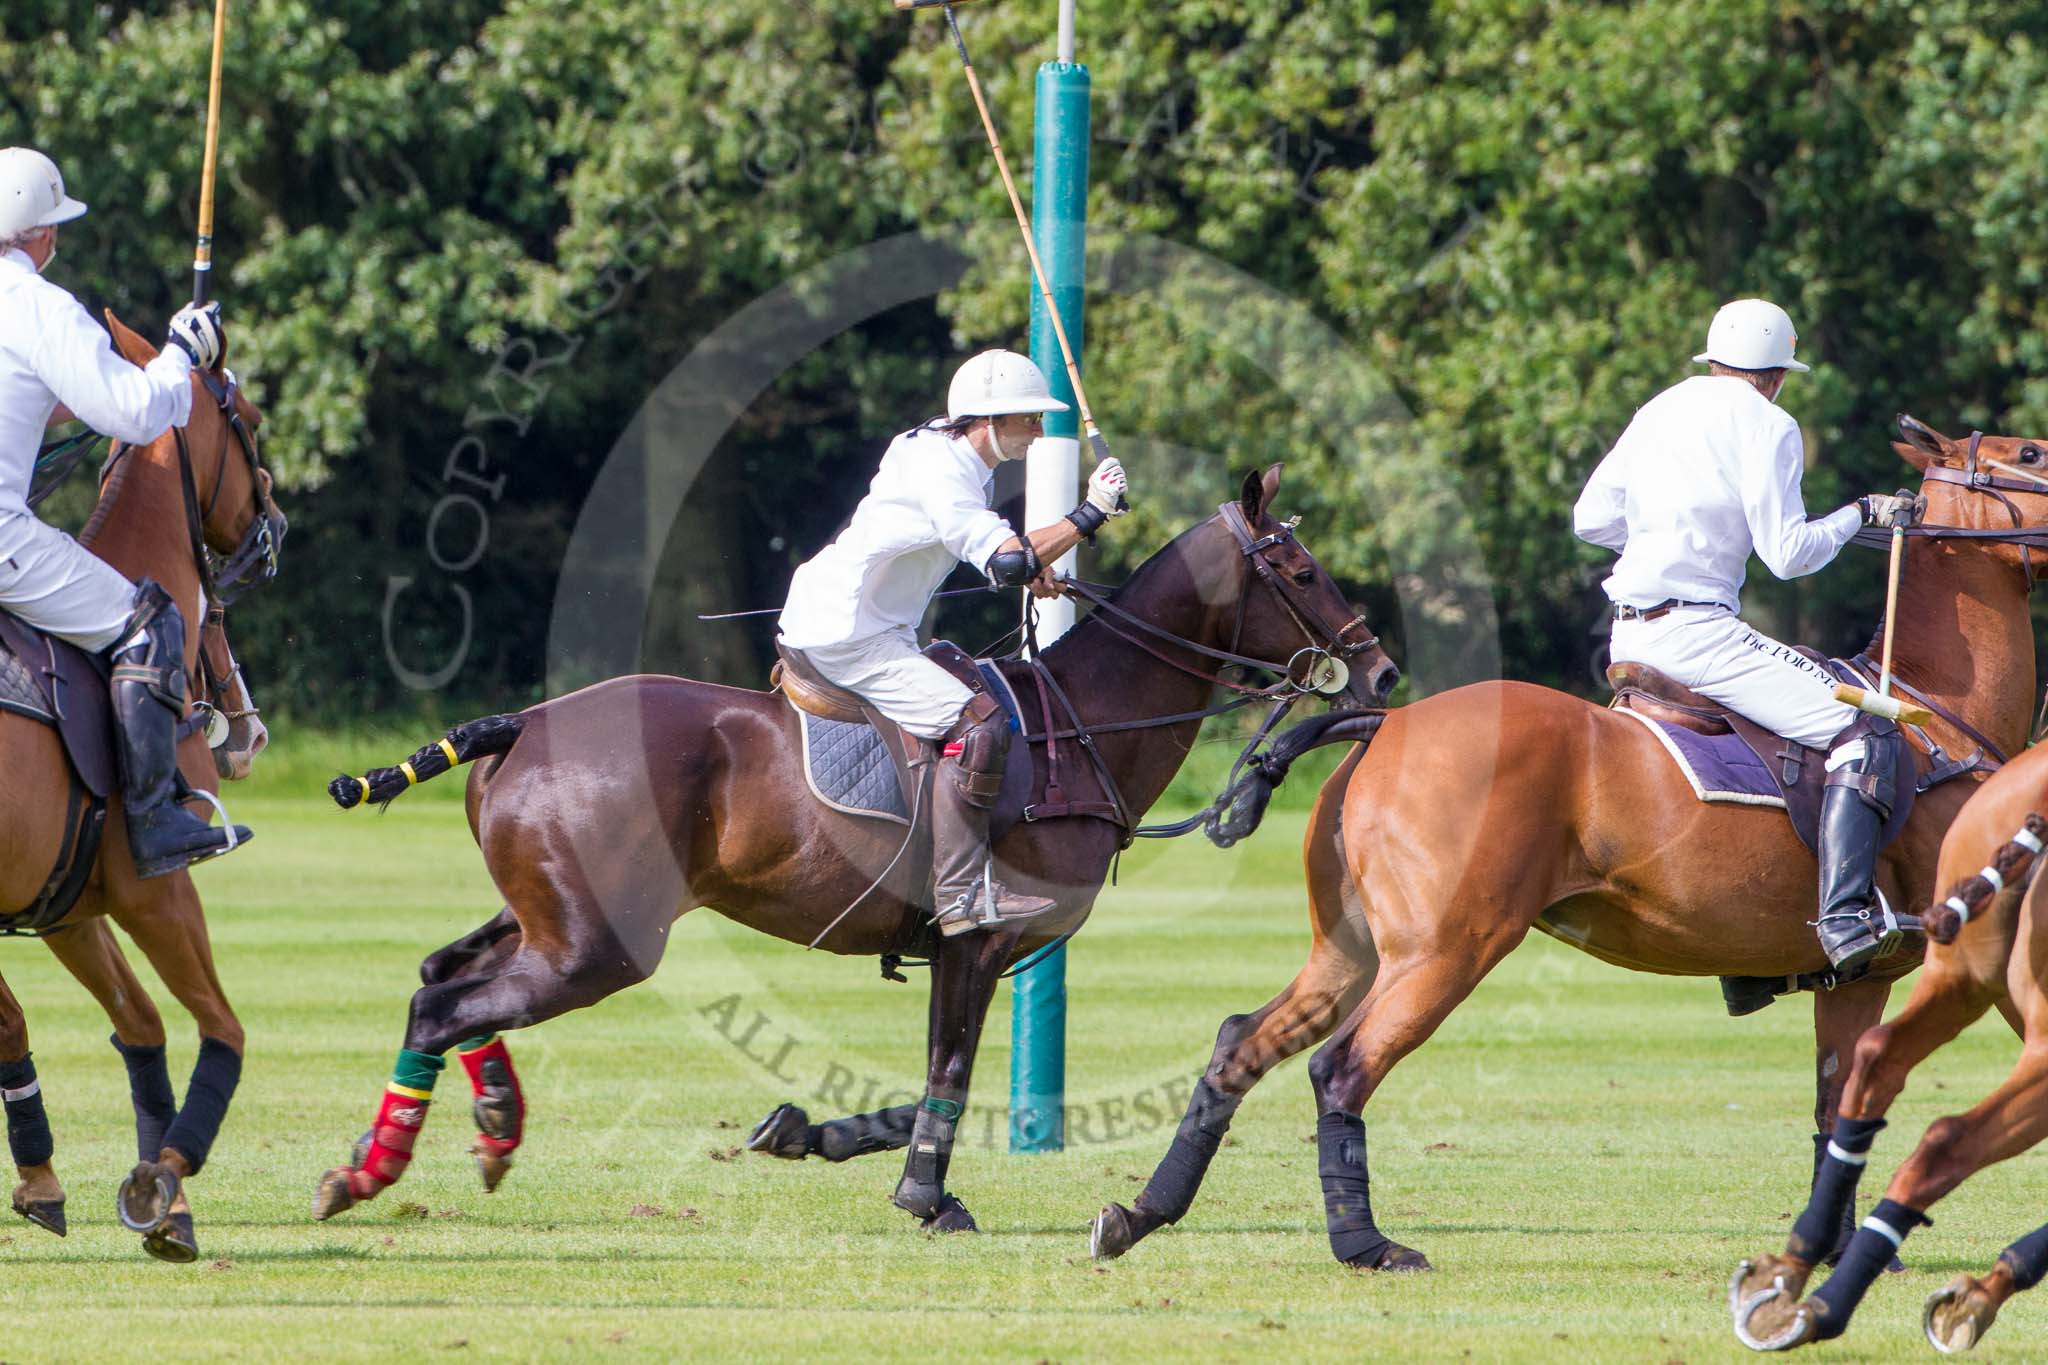 7th Heritage Polo Cup semi-finals: La Golondrina Argentina Pepe Riglos (6)..
Hurtwood Park Polo Club,
Ewhurst Green,
Surrey,
United Kingdom,
on 04 August 2012 at 16:49, image #329